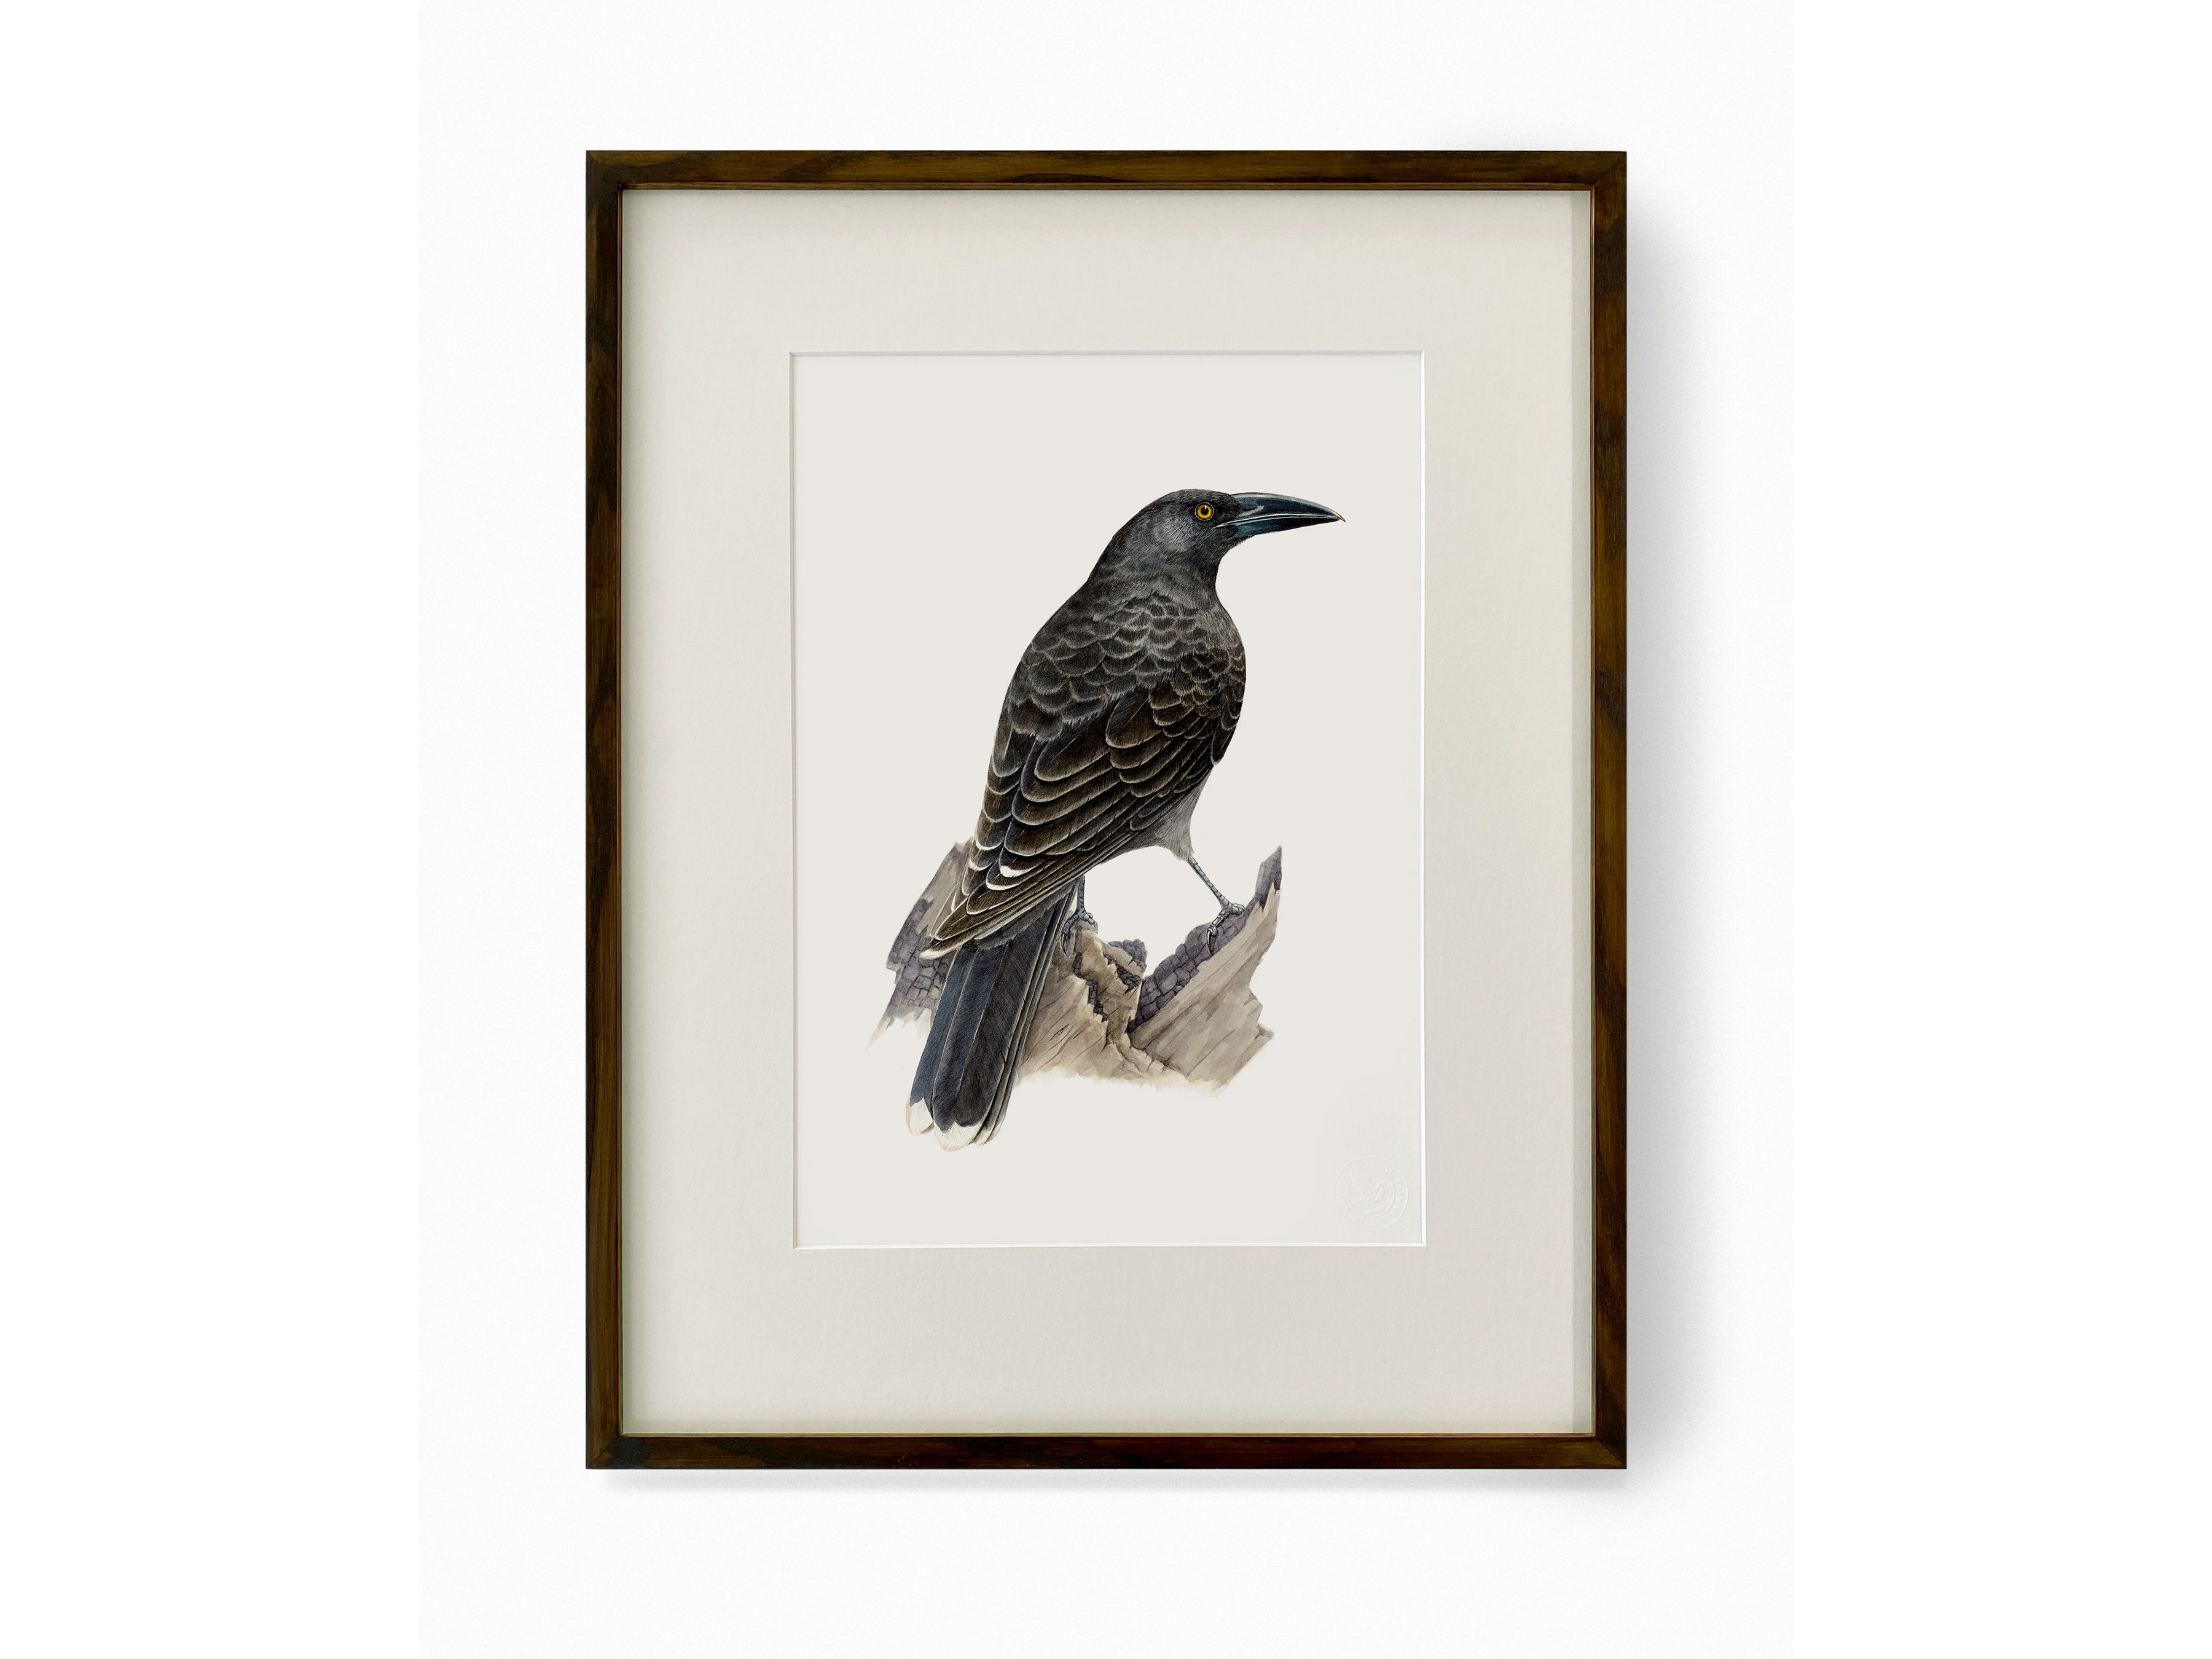 A framed print of a Black Currawong.